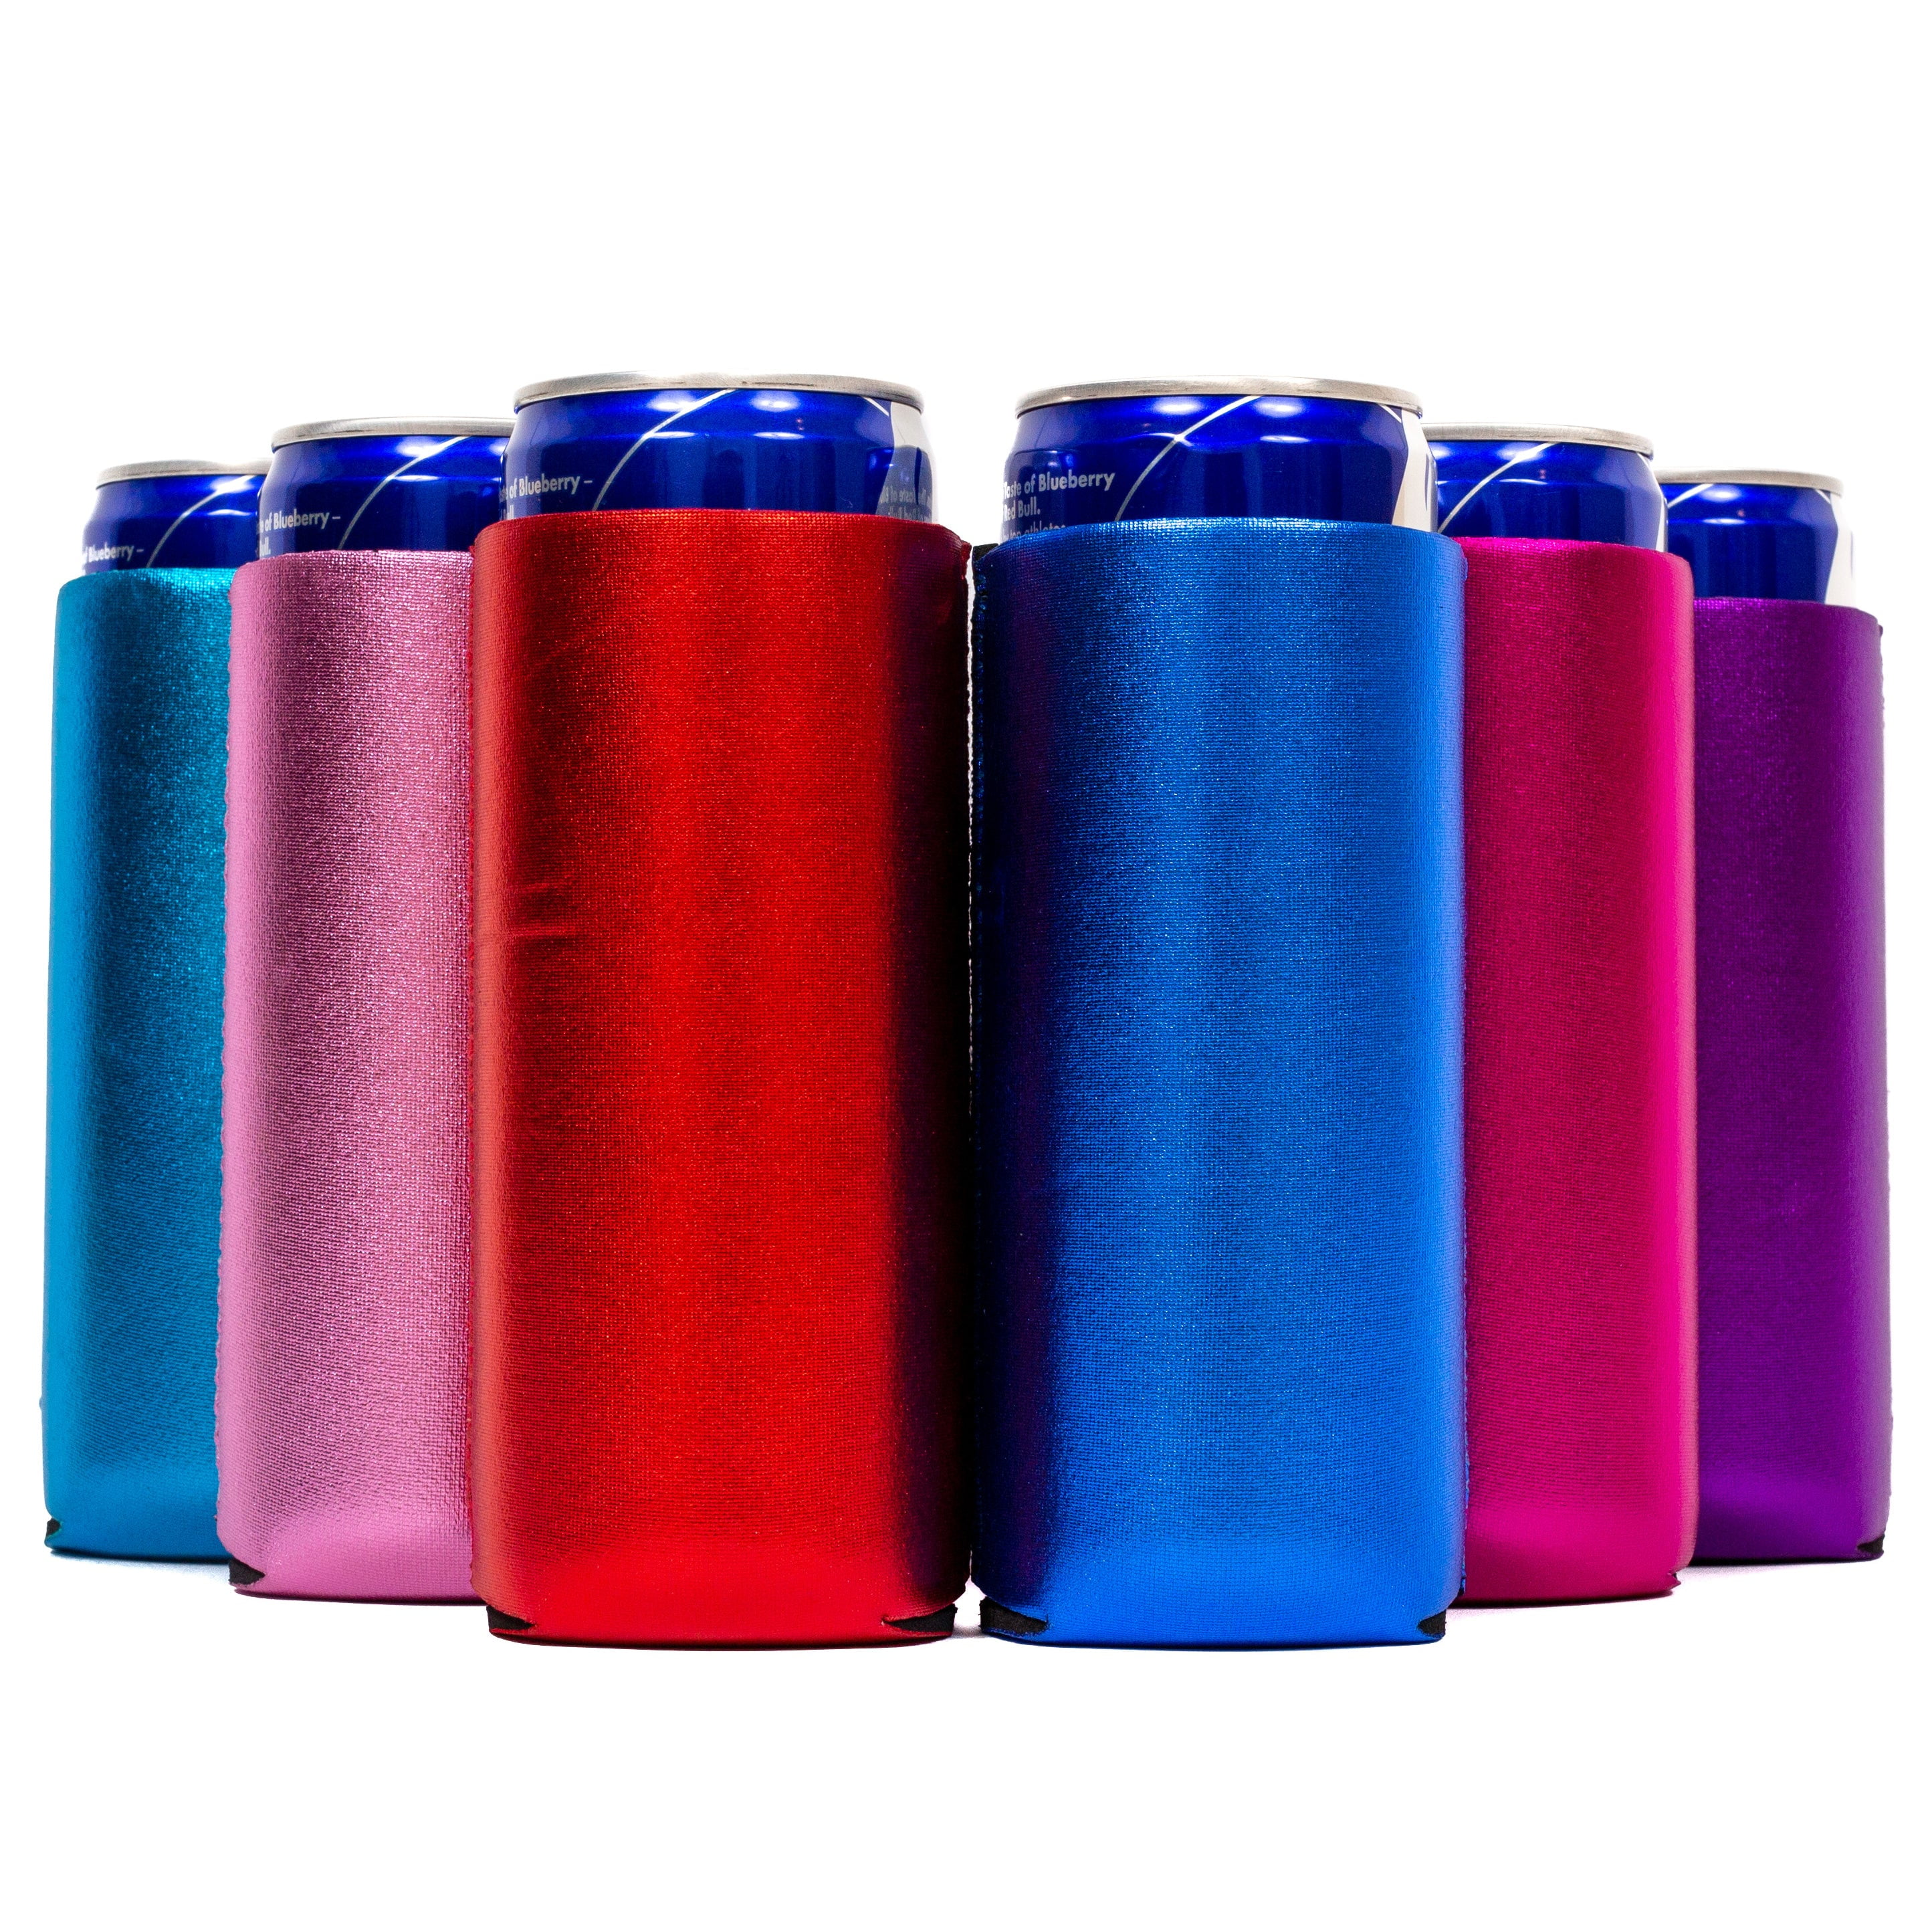 Slim Can Cooler (Assorted) - Loyal Tee Boutique